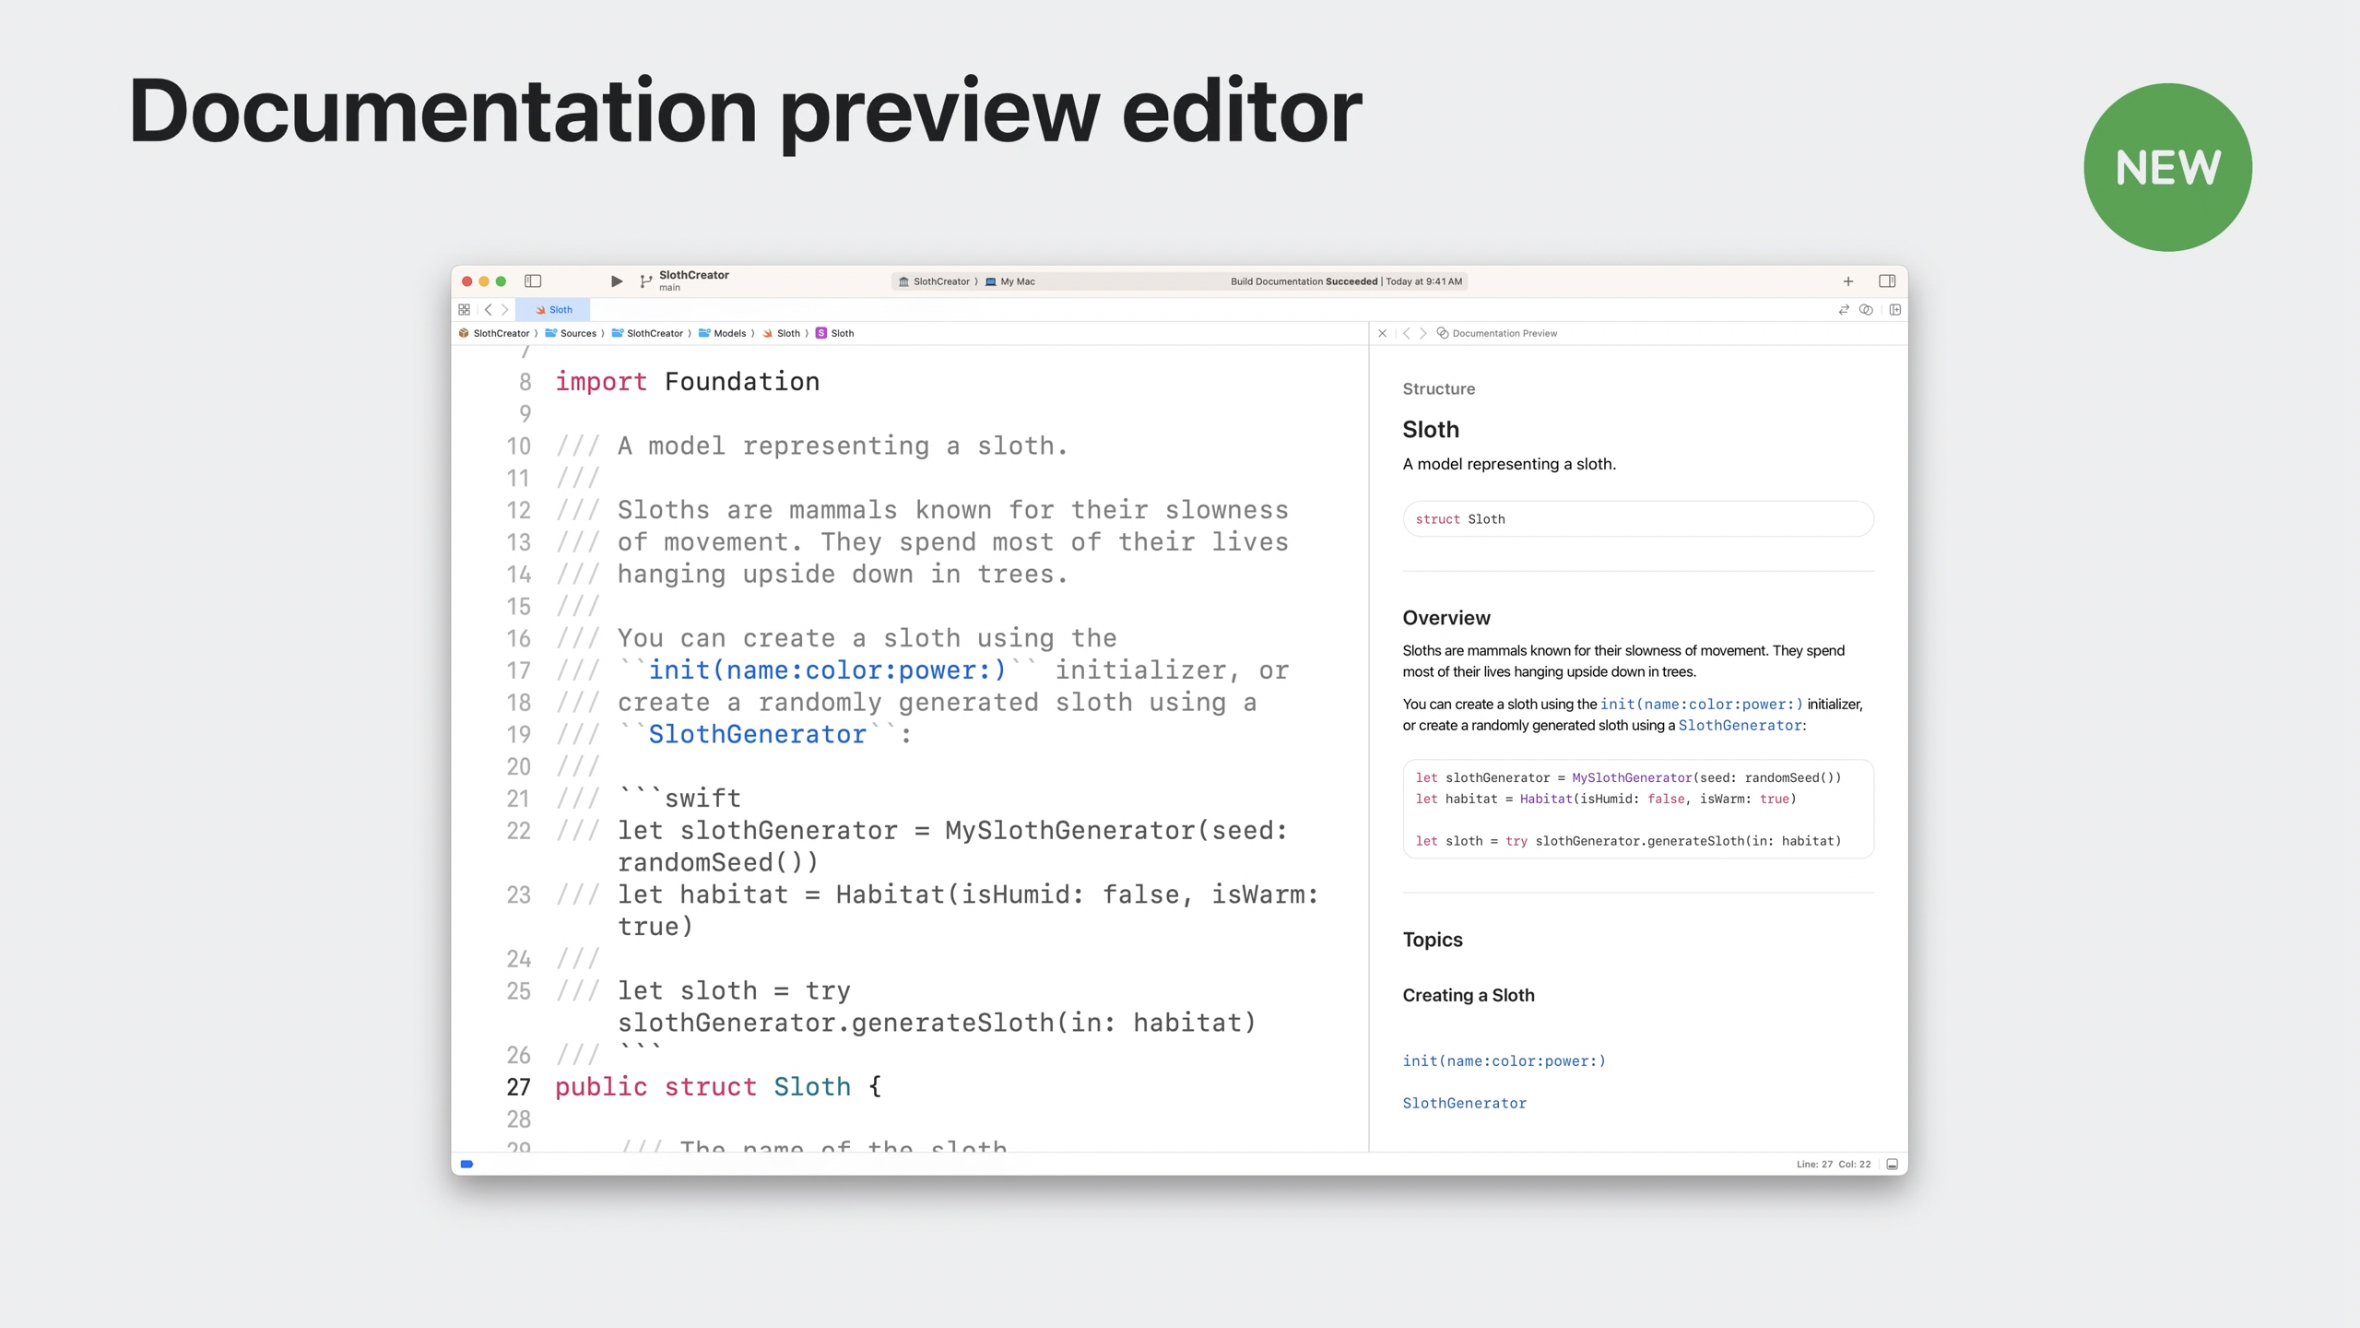 Xcode 15's Documentation Preview, with code on the left that's documented and the rigth is a preview of what that documentation will look like rendered with DocC